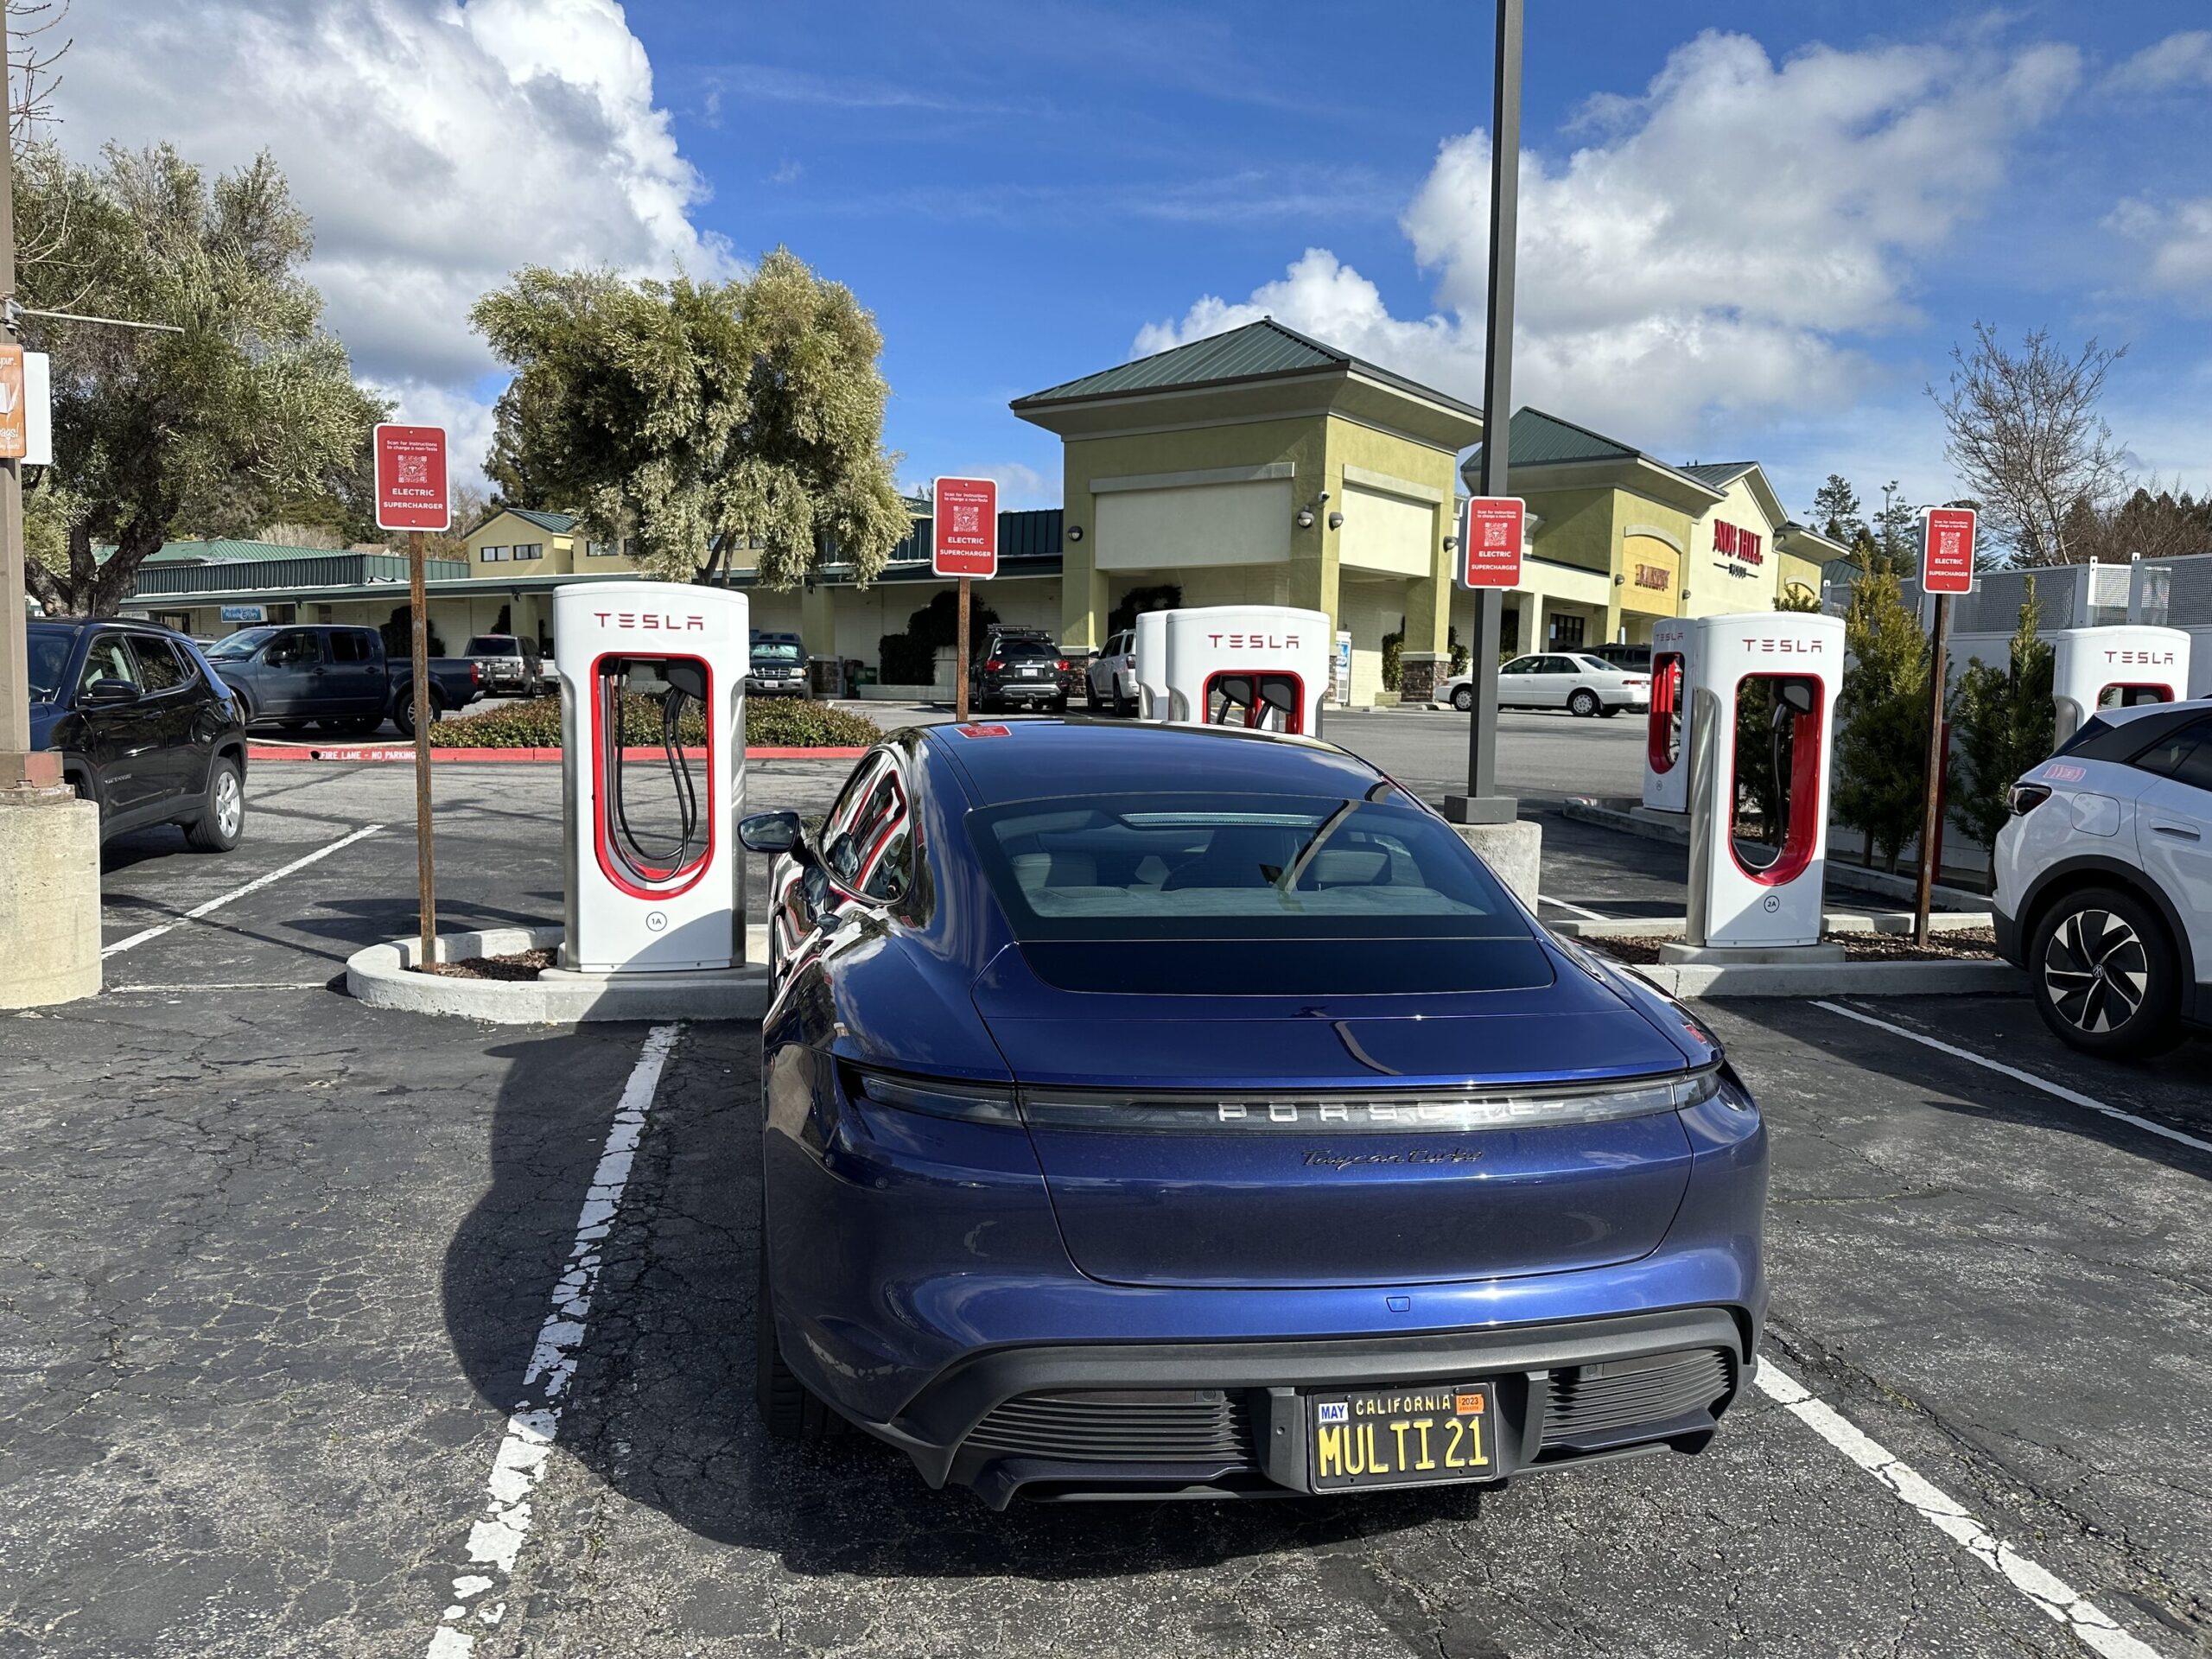 Tesla's 'Magic Dock' will move Supercharger network to all-EV compatibility